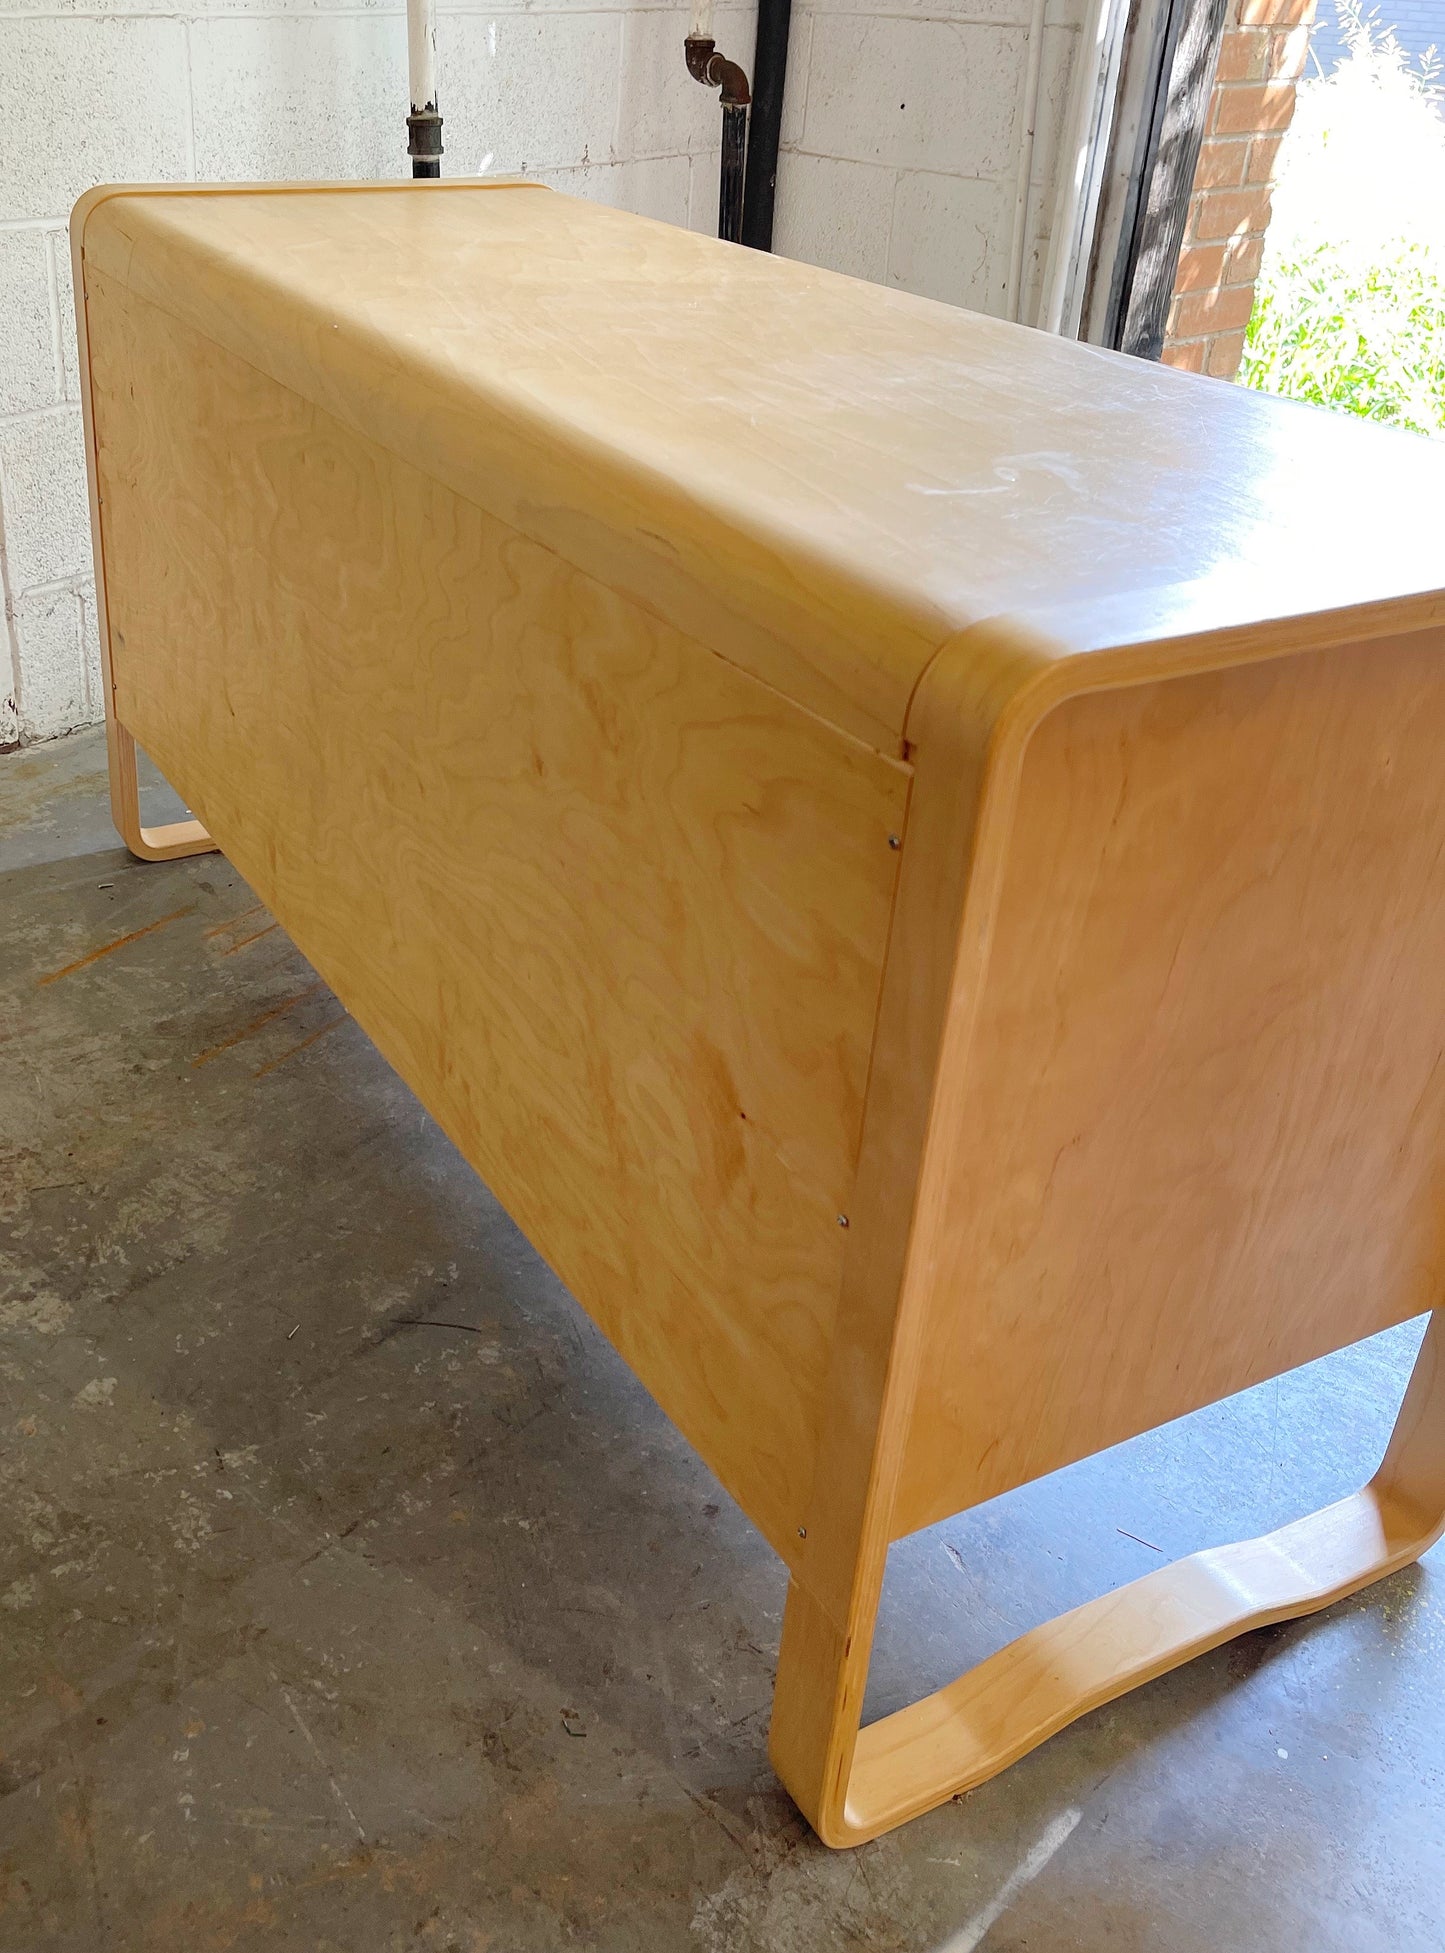 Vintage IKEA Dresser - Anes - Birch Plywood with Curved Legs